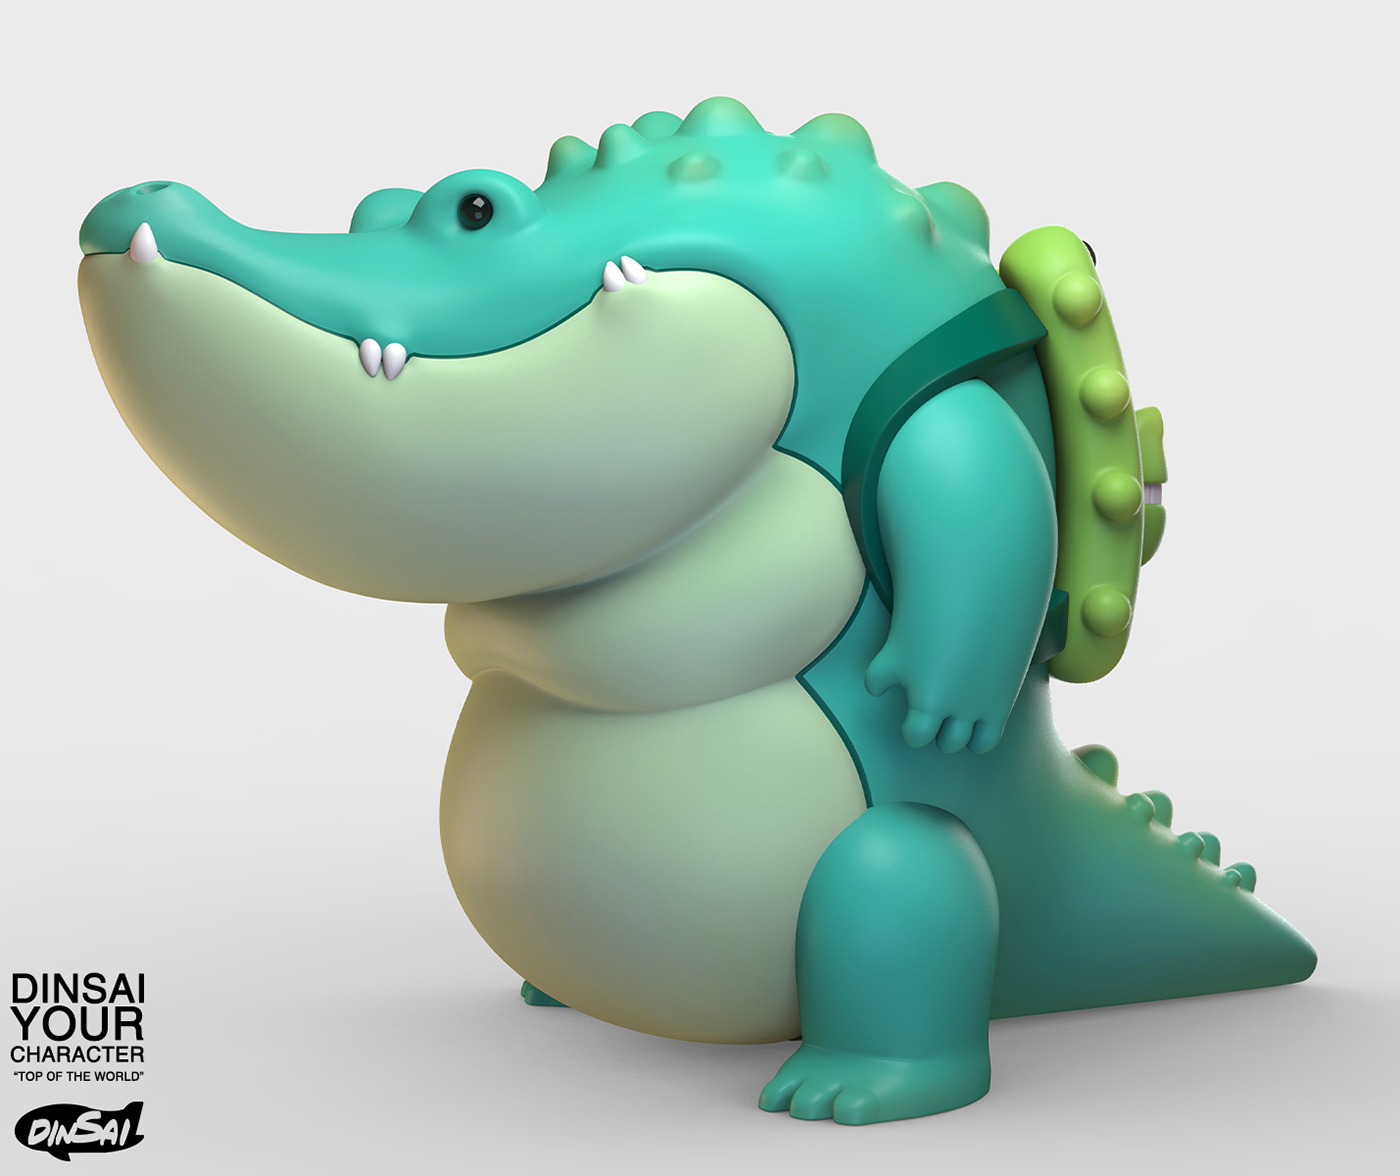 crocodile cute lacoste bag toy Character design